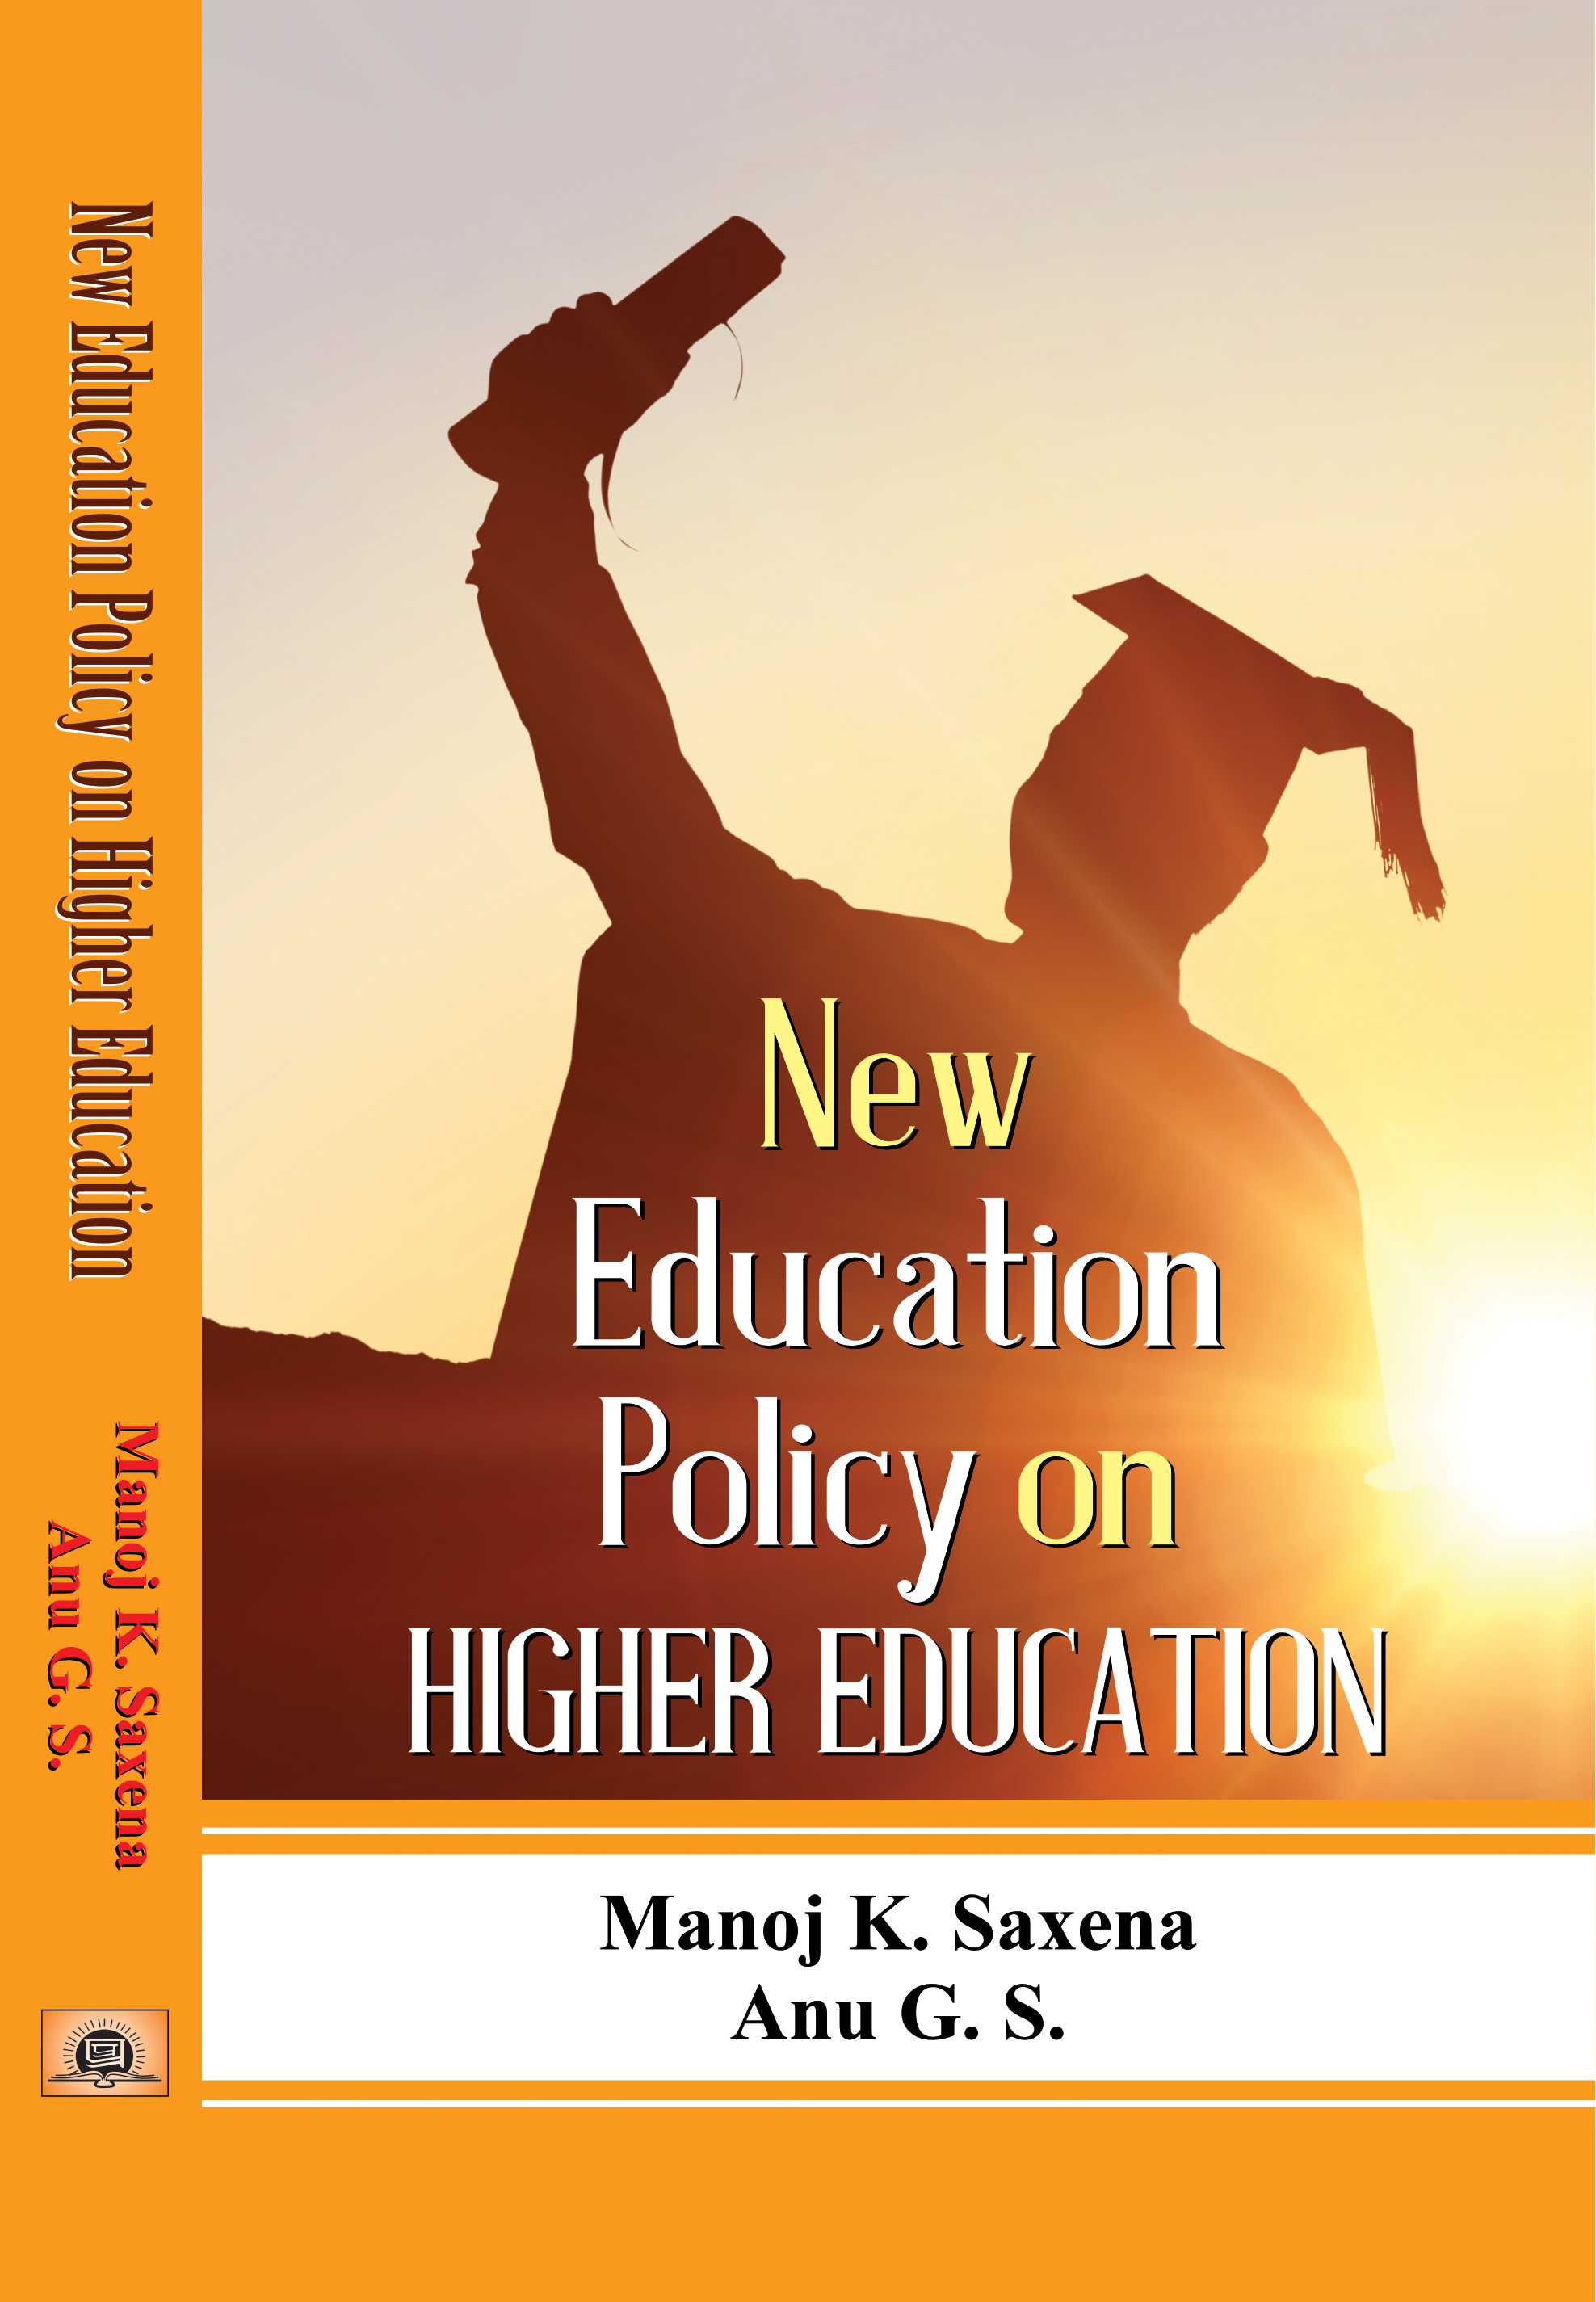 phd in new education policy